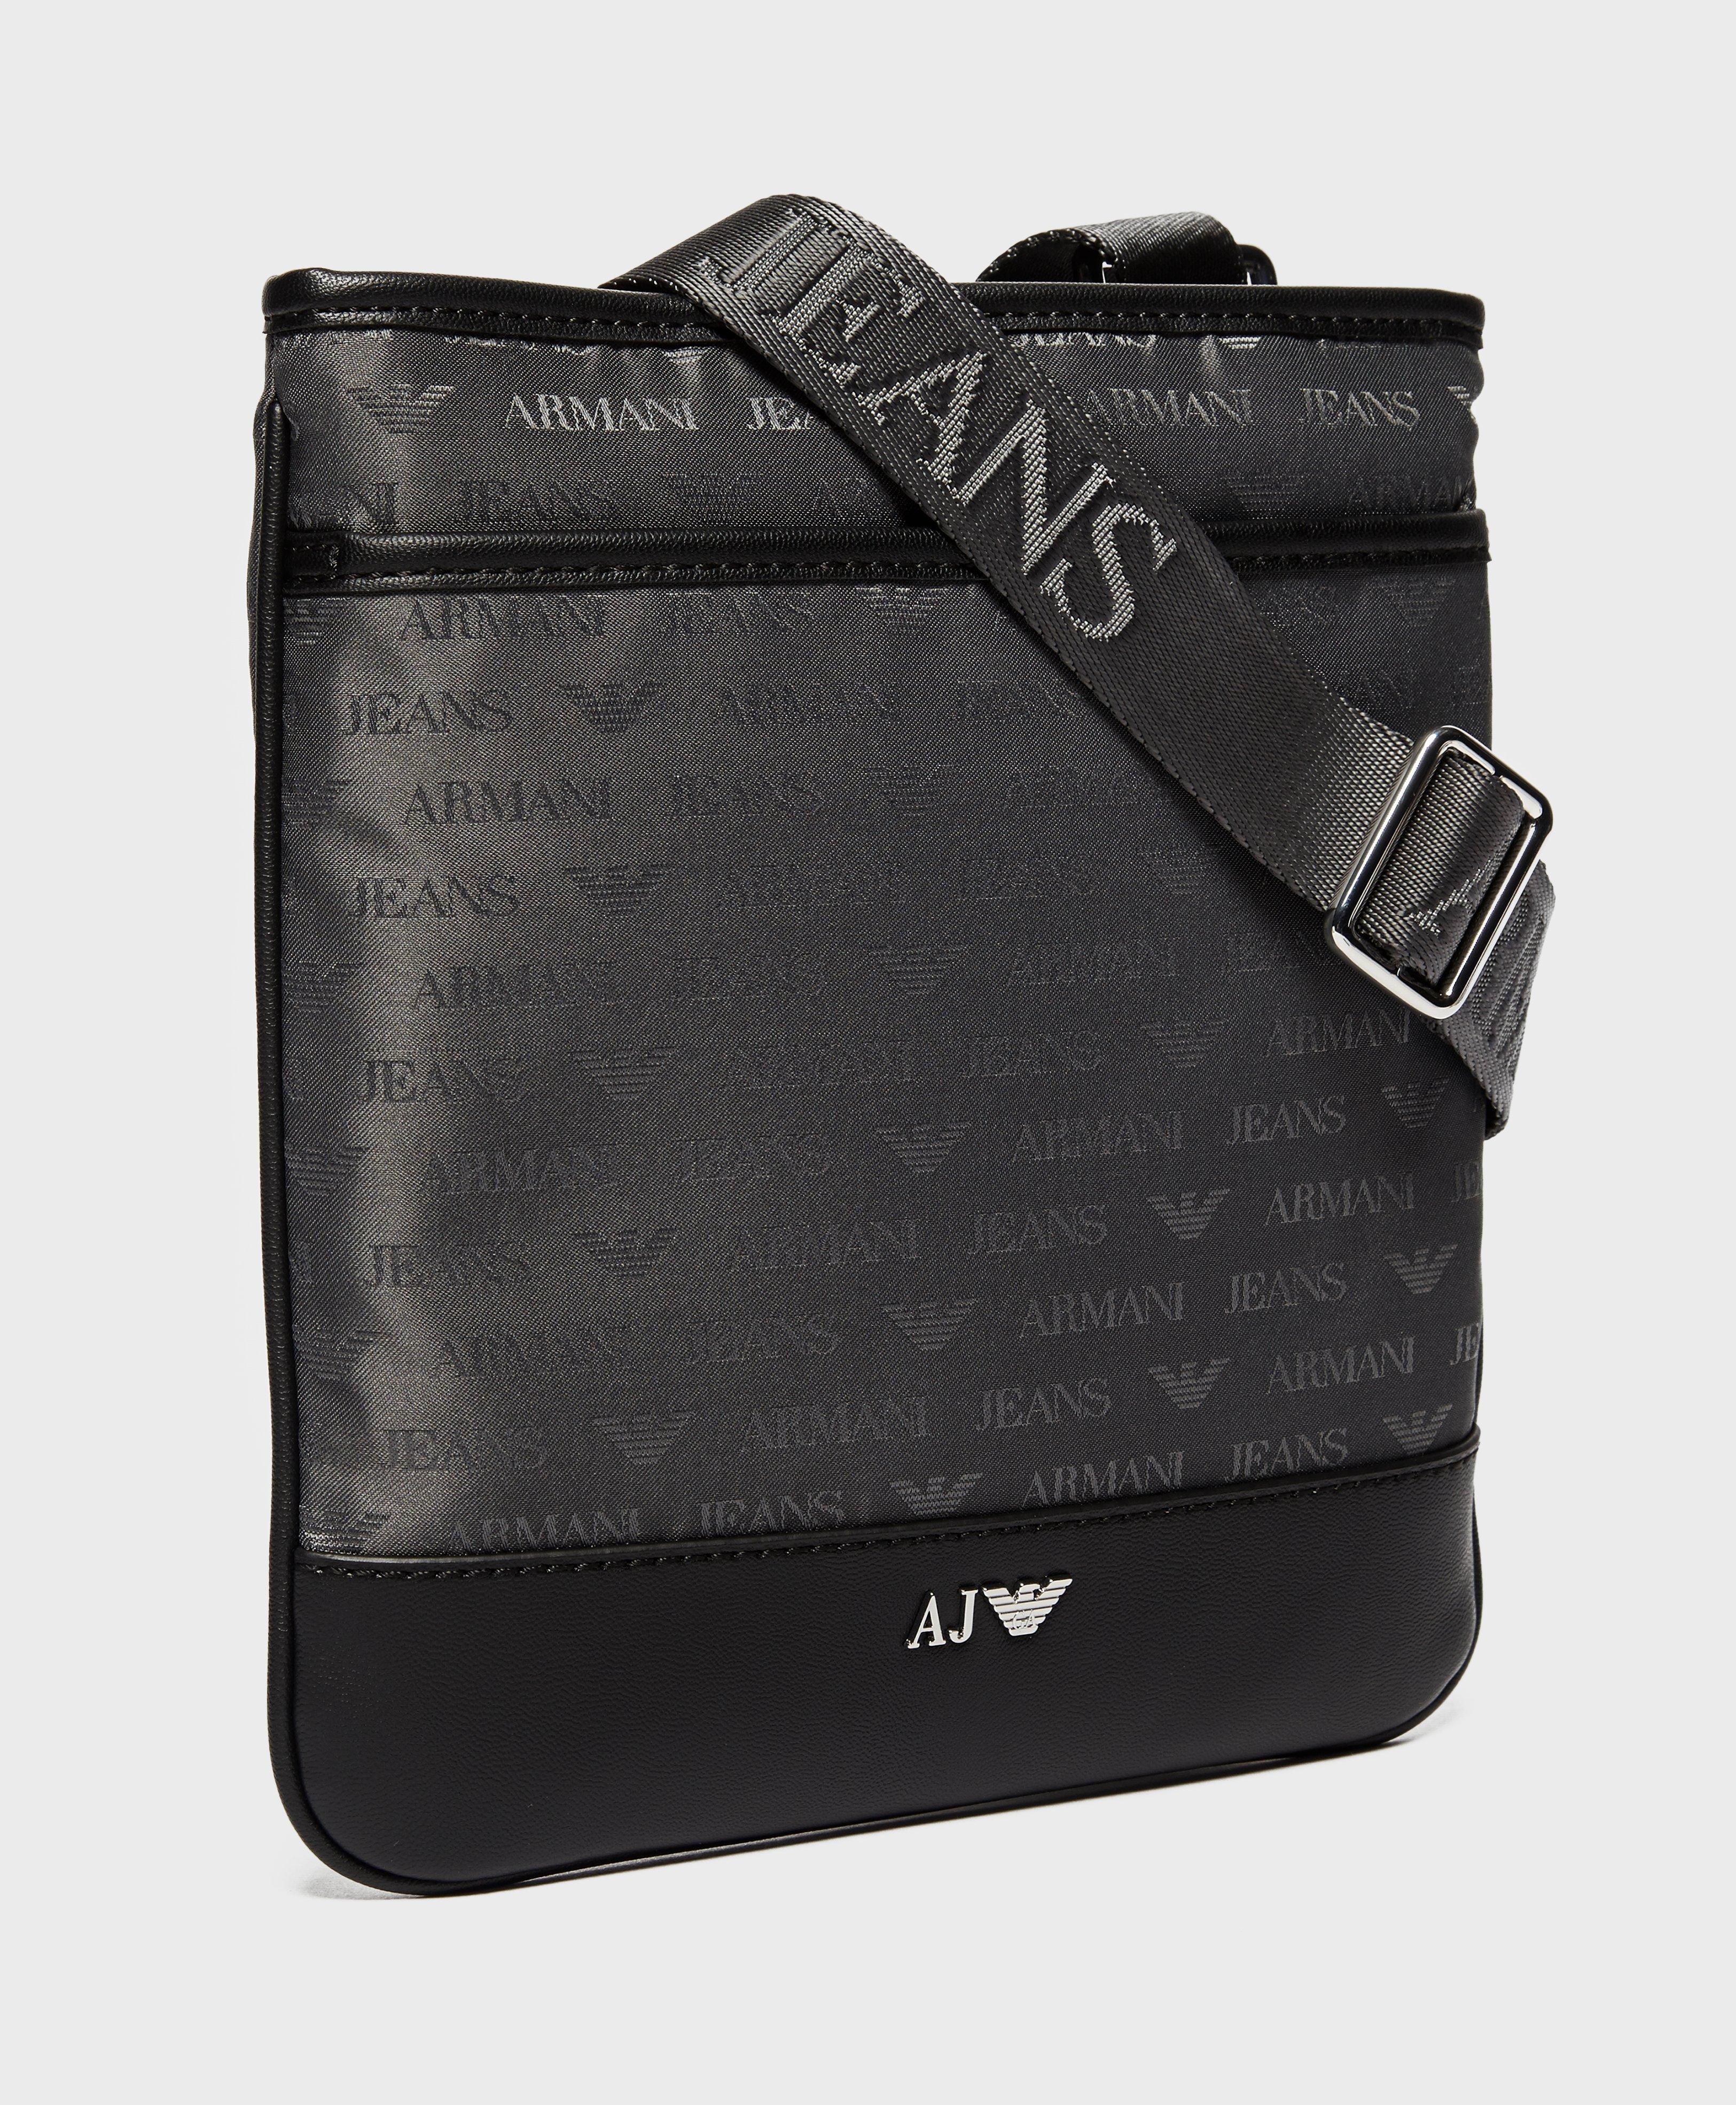 Armani Jeans Synthetic Nylon Small Item Bag in Black for Men - Lyst